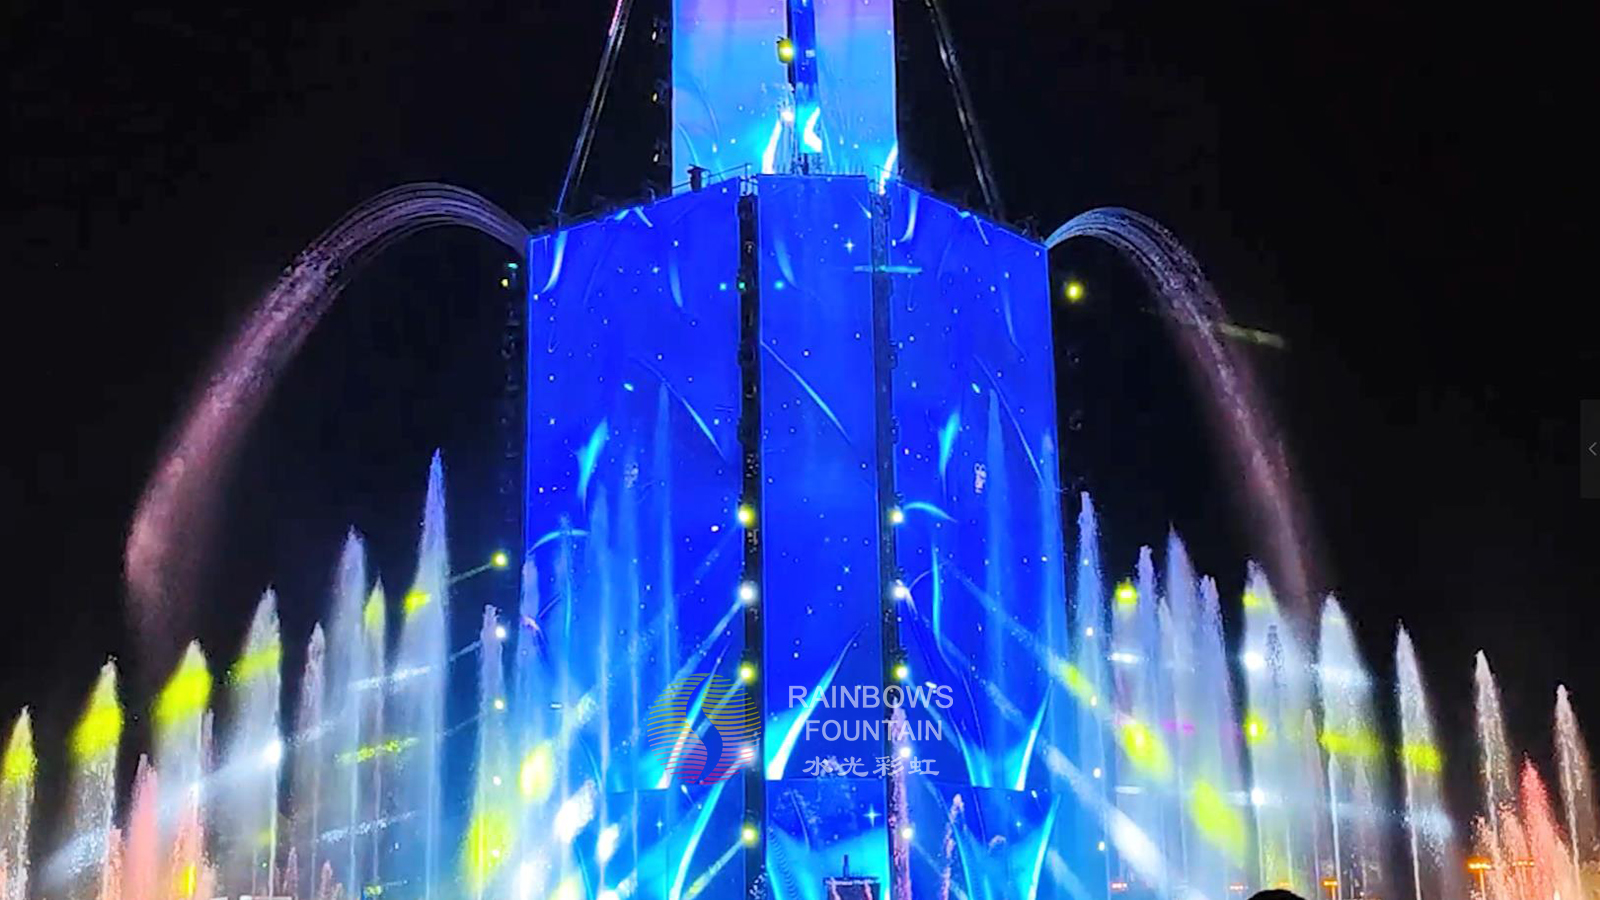 Multimedia Musical Fountain Show in UAE for Sheikh Zayed Festival